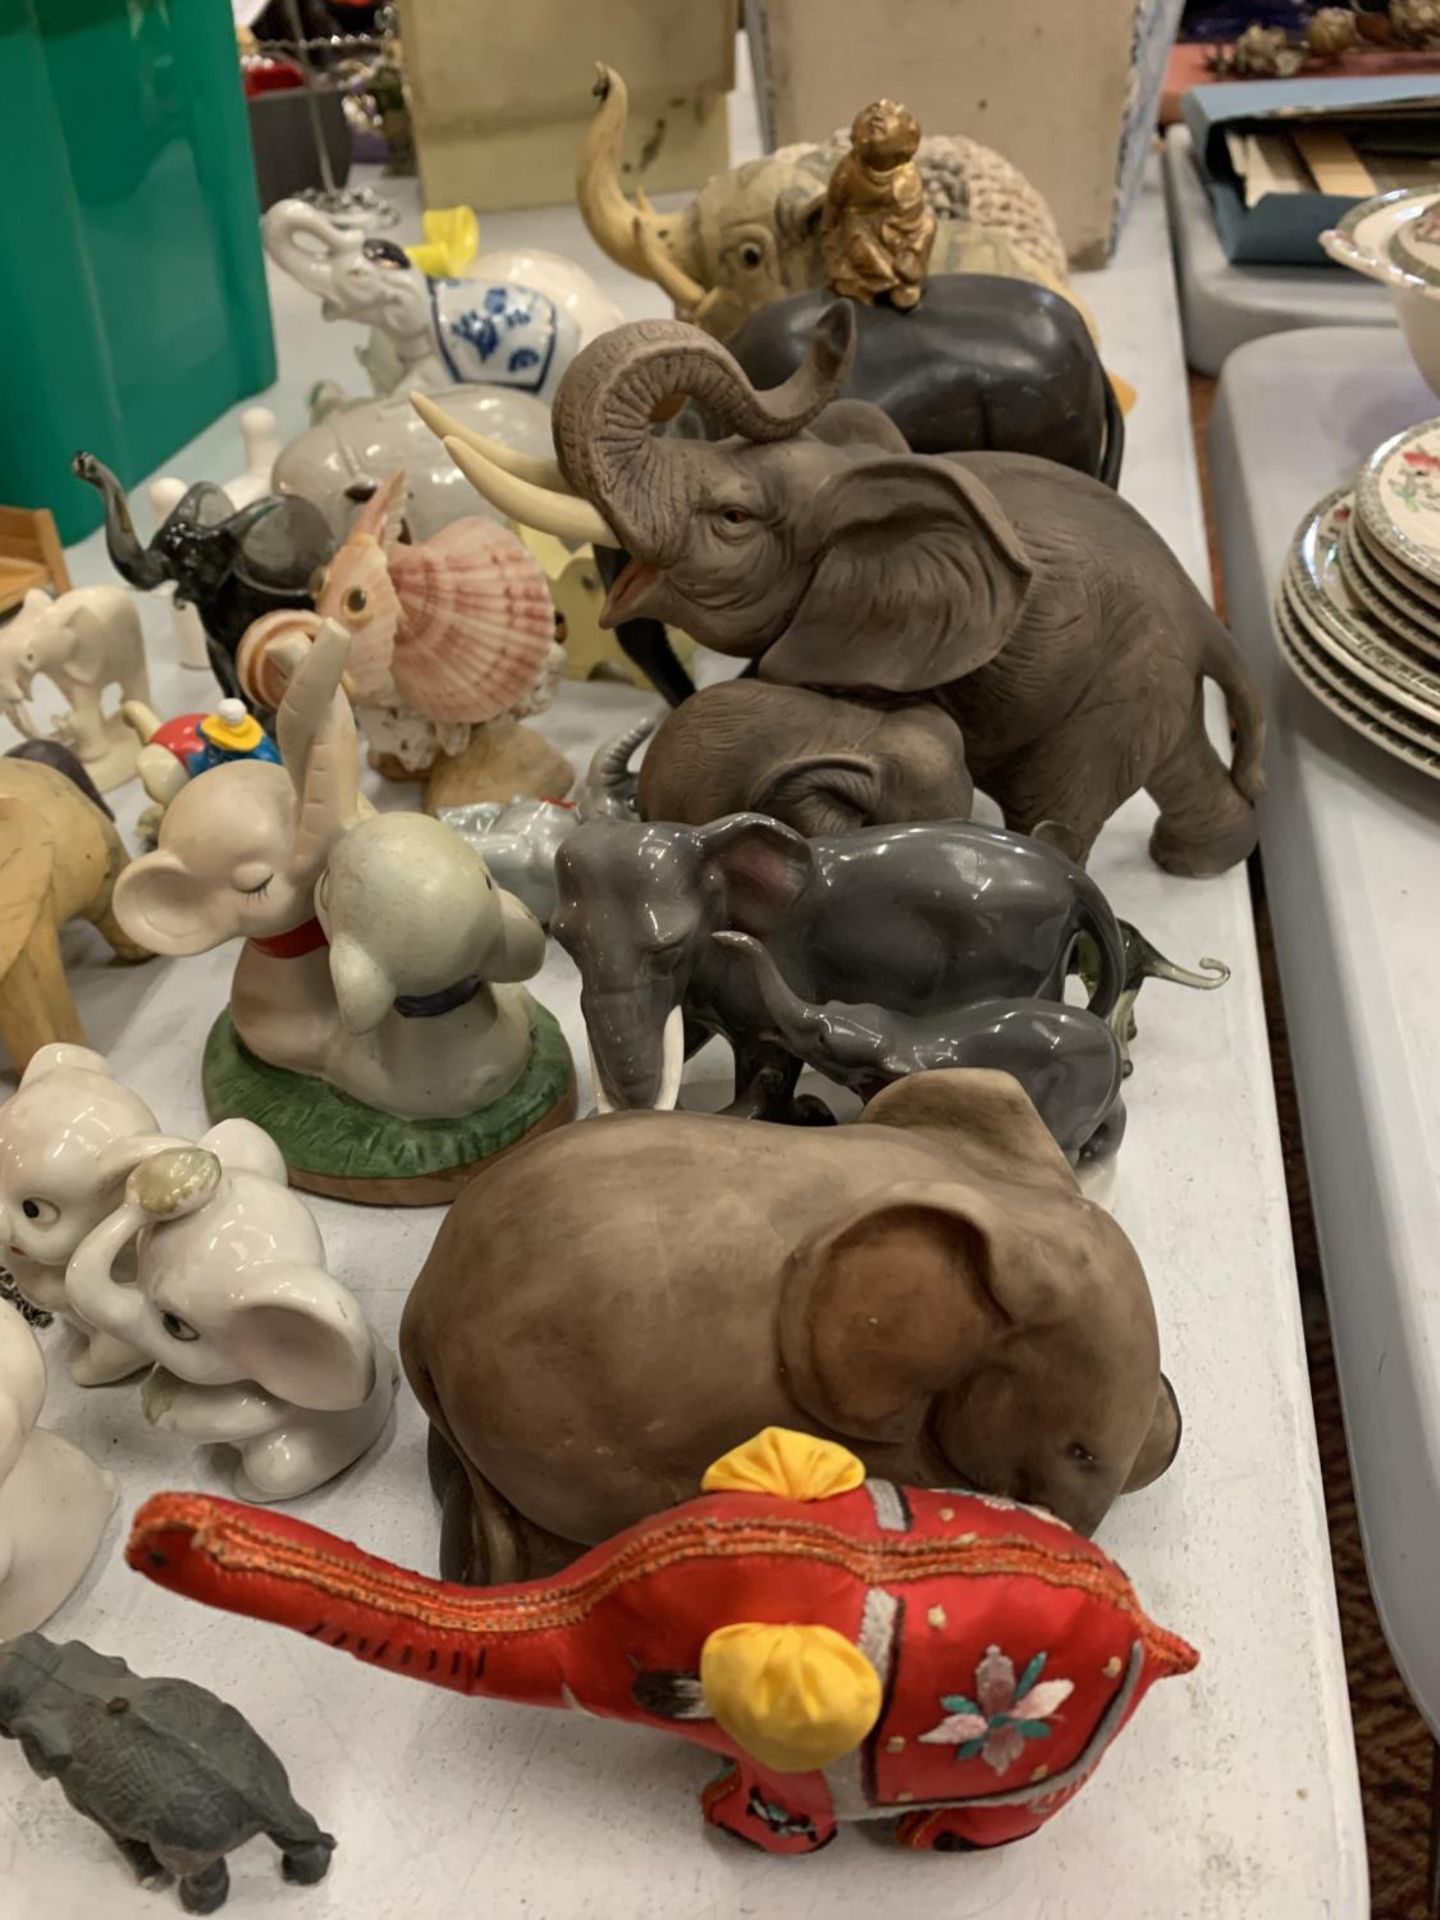 A LARGE QUANTITY OF COLLECTABLE ELEPHANTS OF ALL SIZES, INCLUDES, CERAMIC, WOODEN, ETC - Image 2 of 8